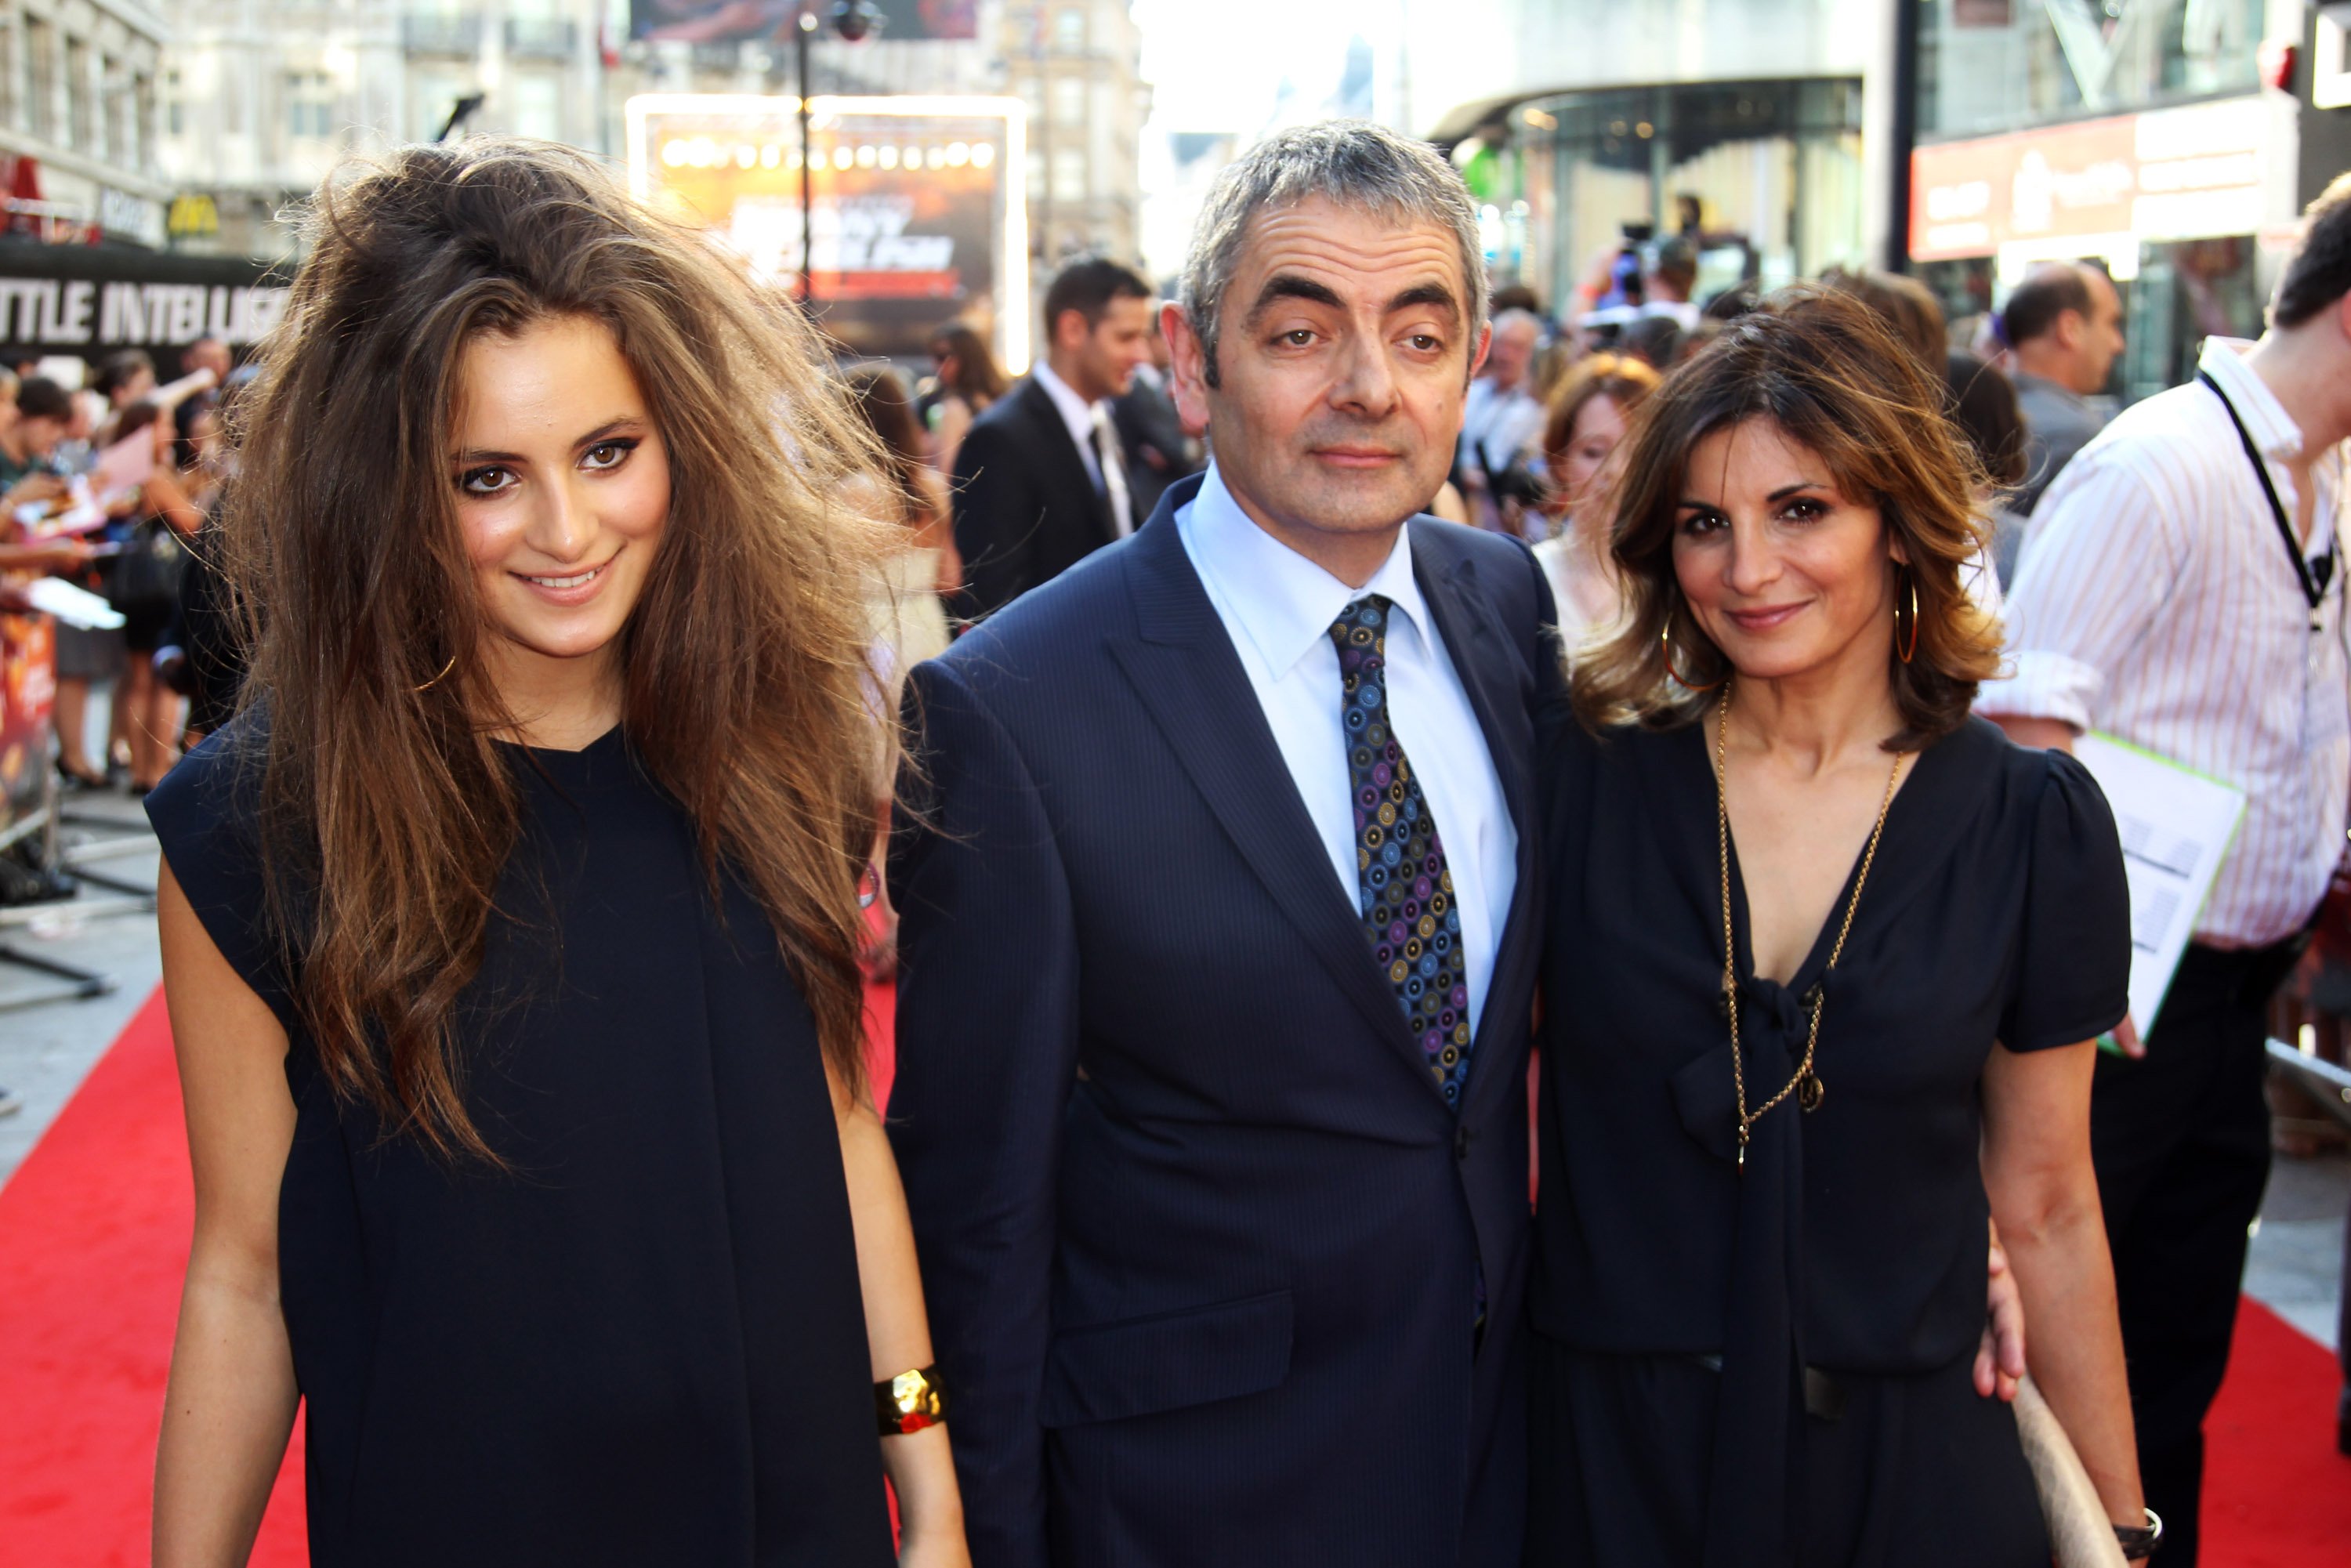 Rowan Atkinson, Sunetra and Lily Sastry photographed arriving at the UK Premiere of 'Johnny English Reborn' in London | Source: Getty Images